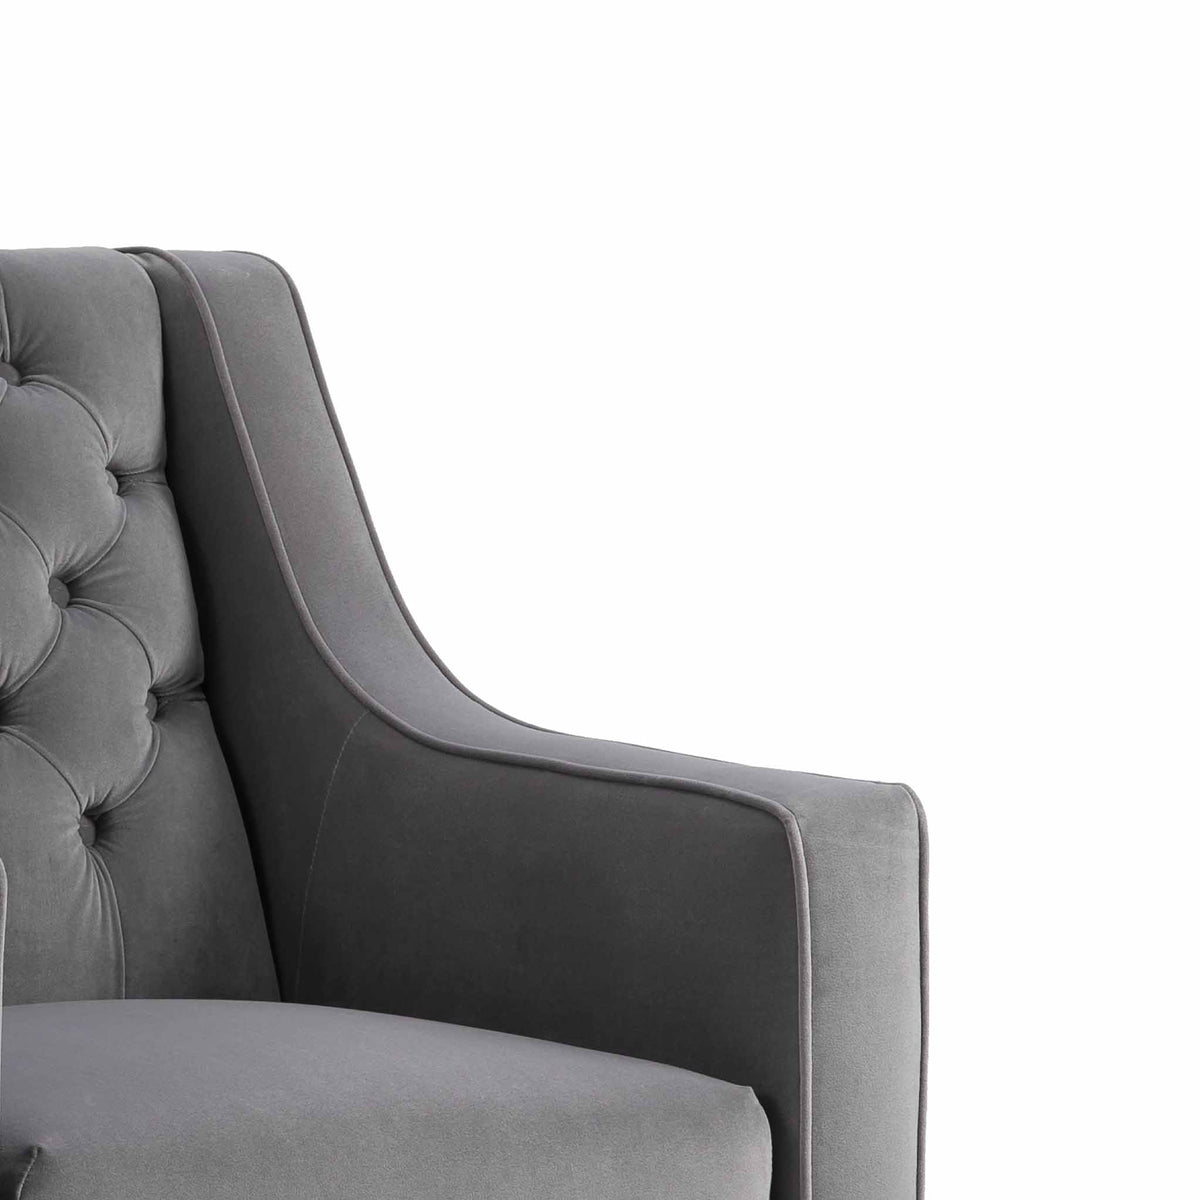 Eliza Grey Chesterfield Arm Chair  - Close up of shape of armrest